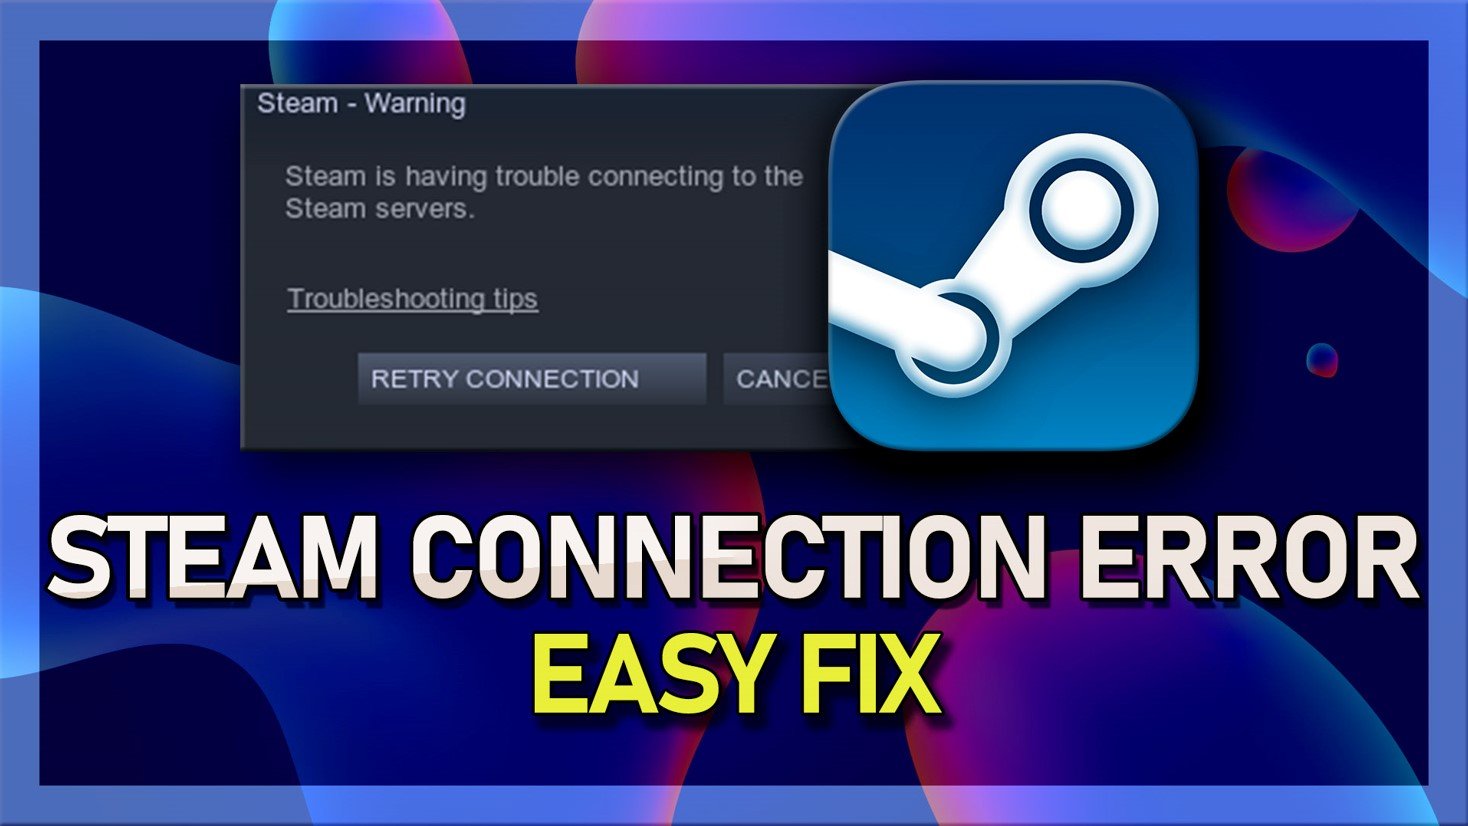 Fatal error online session interface missing please make sure steam is running фото 74